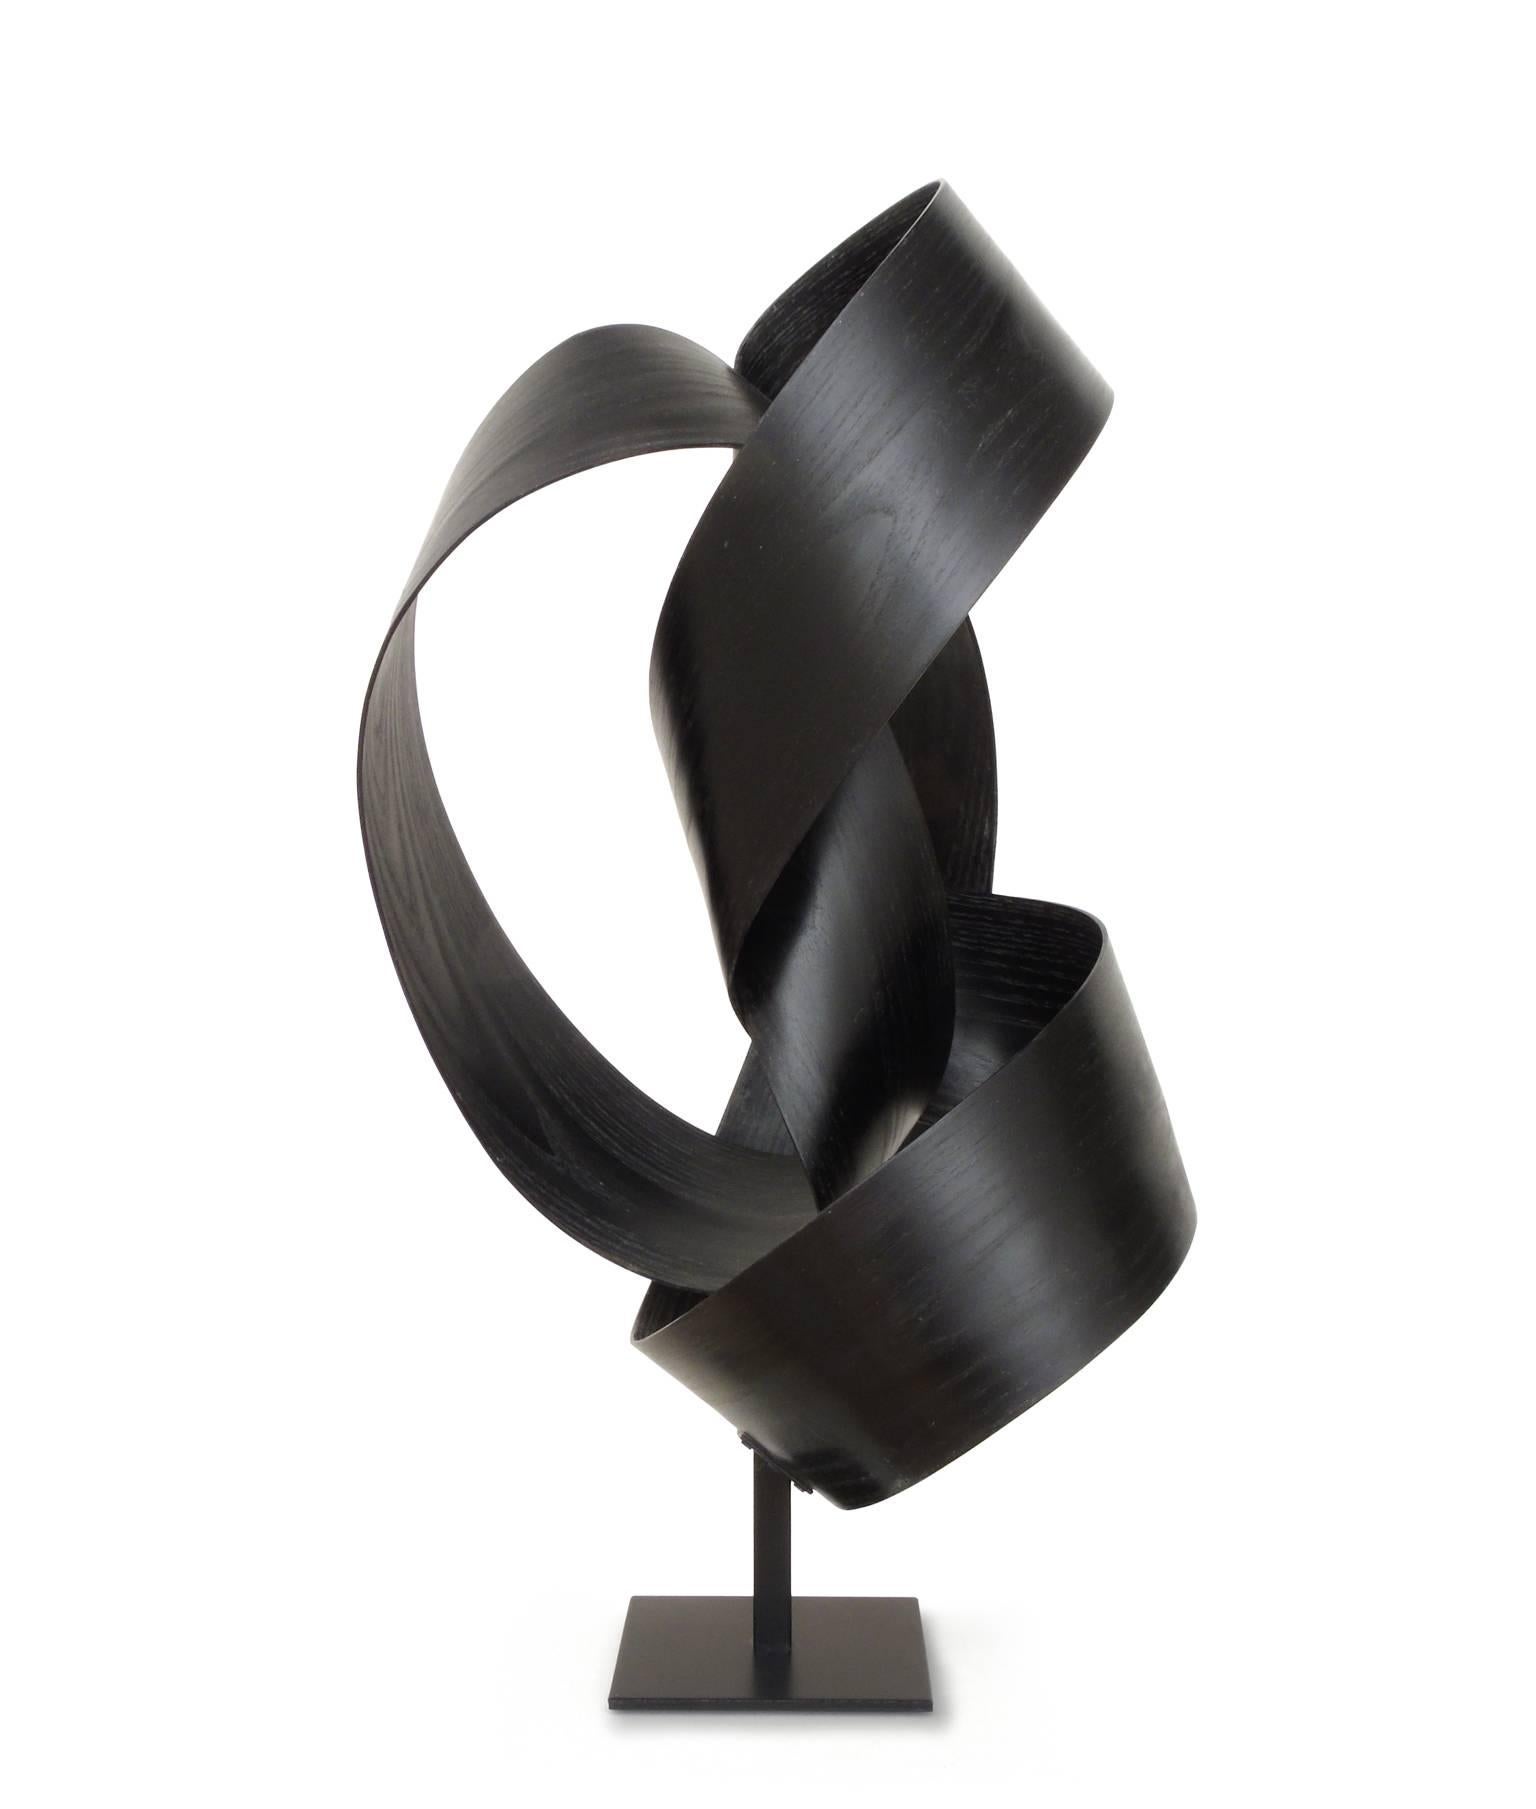 Atmosphere #248 (black bentwood sculpture) - Brown Abstract Sculpture by Jeremy Holmes